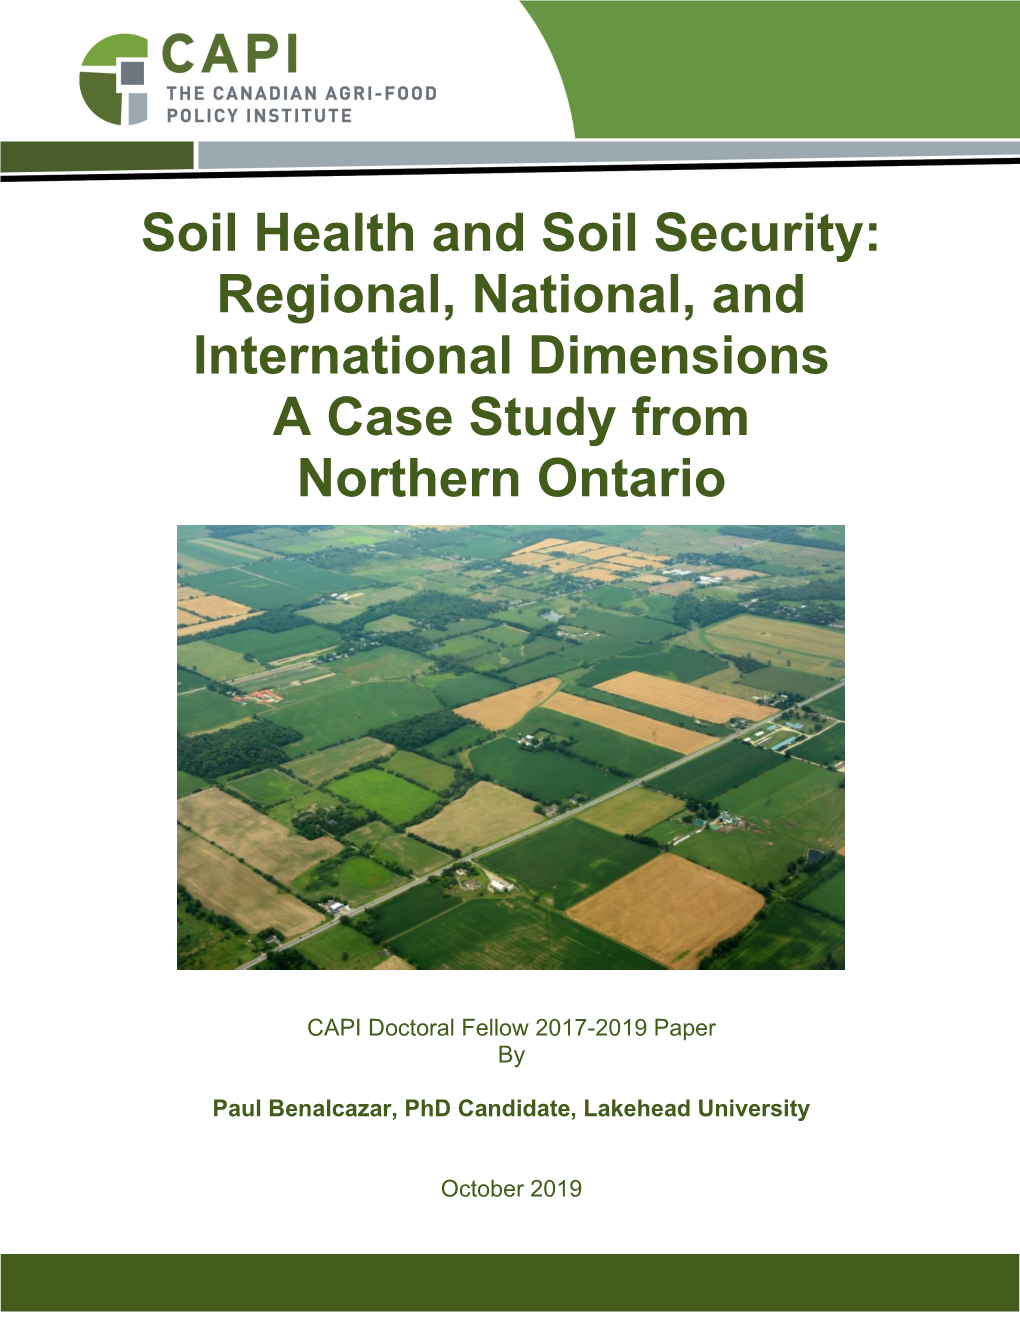 Regional, National, and International Dimensions a Case Study from Northern Ontario